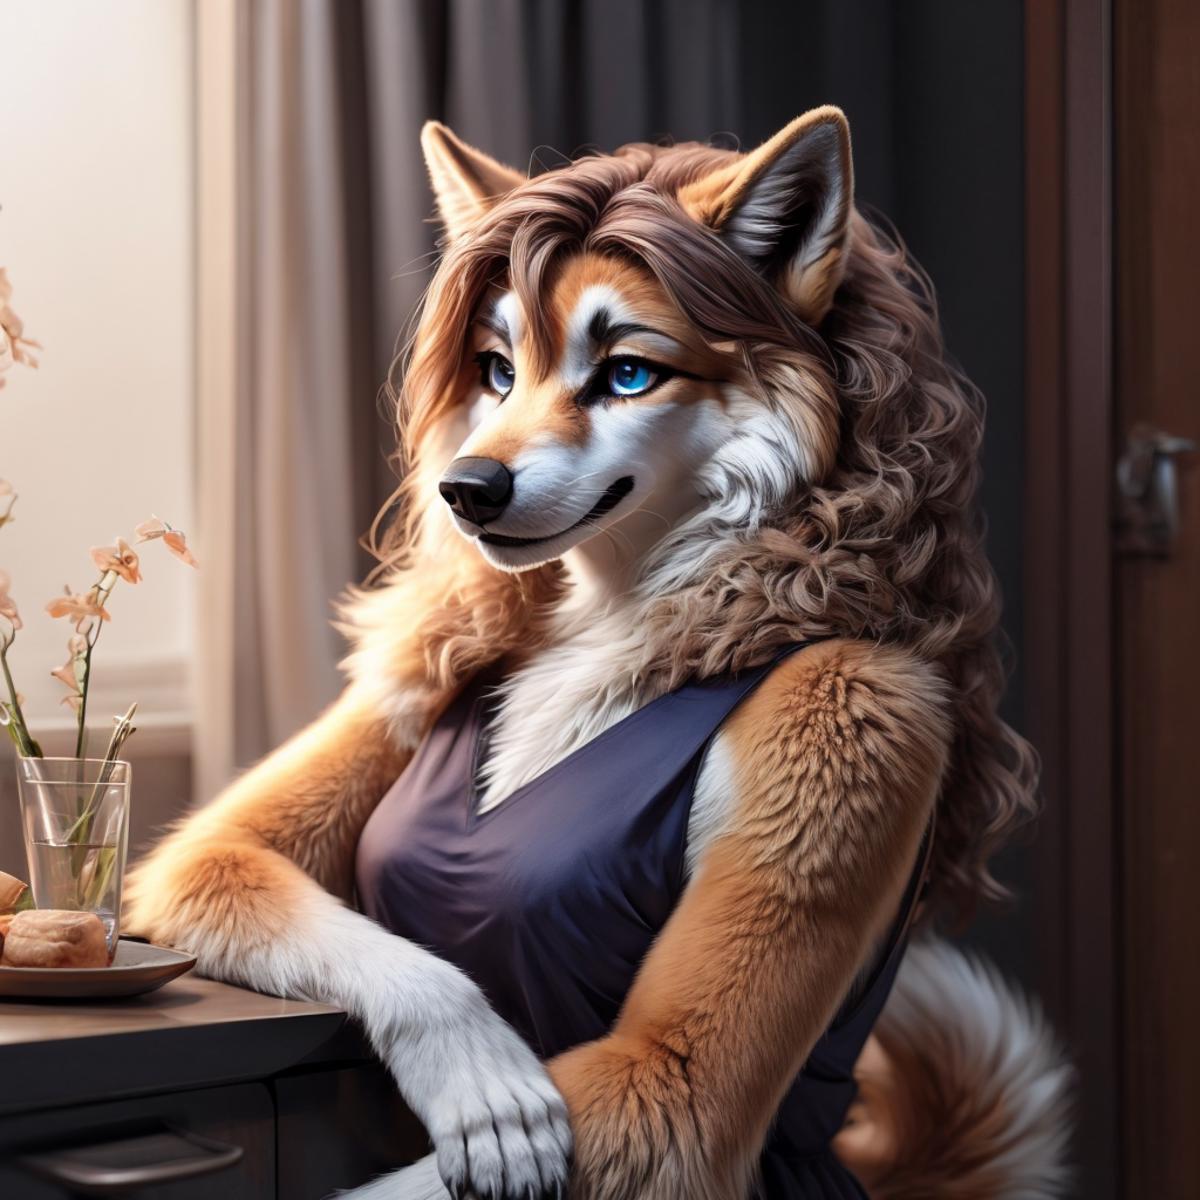 SEELREAL: Furry Realistic image by SEELREAL